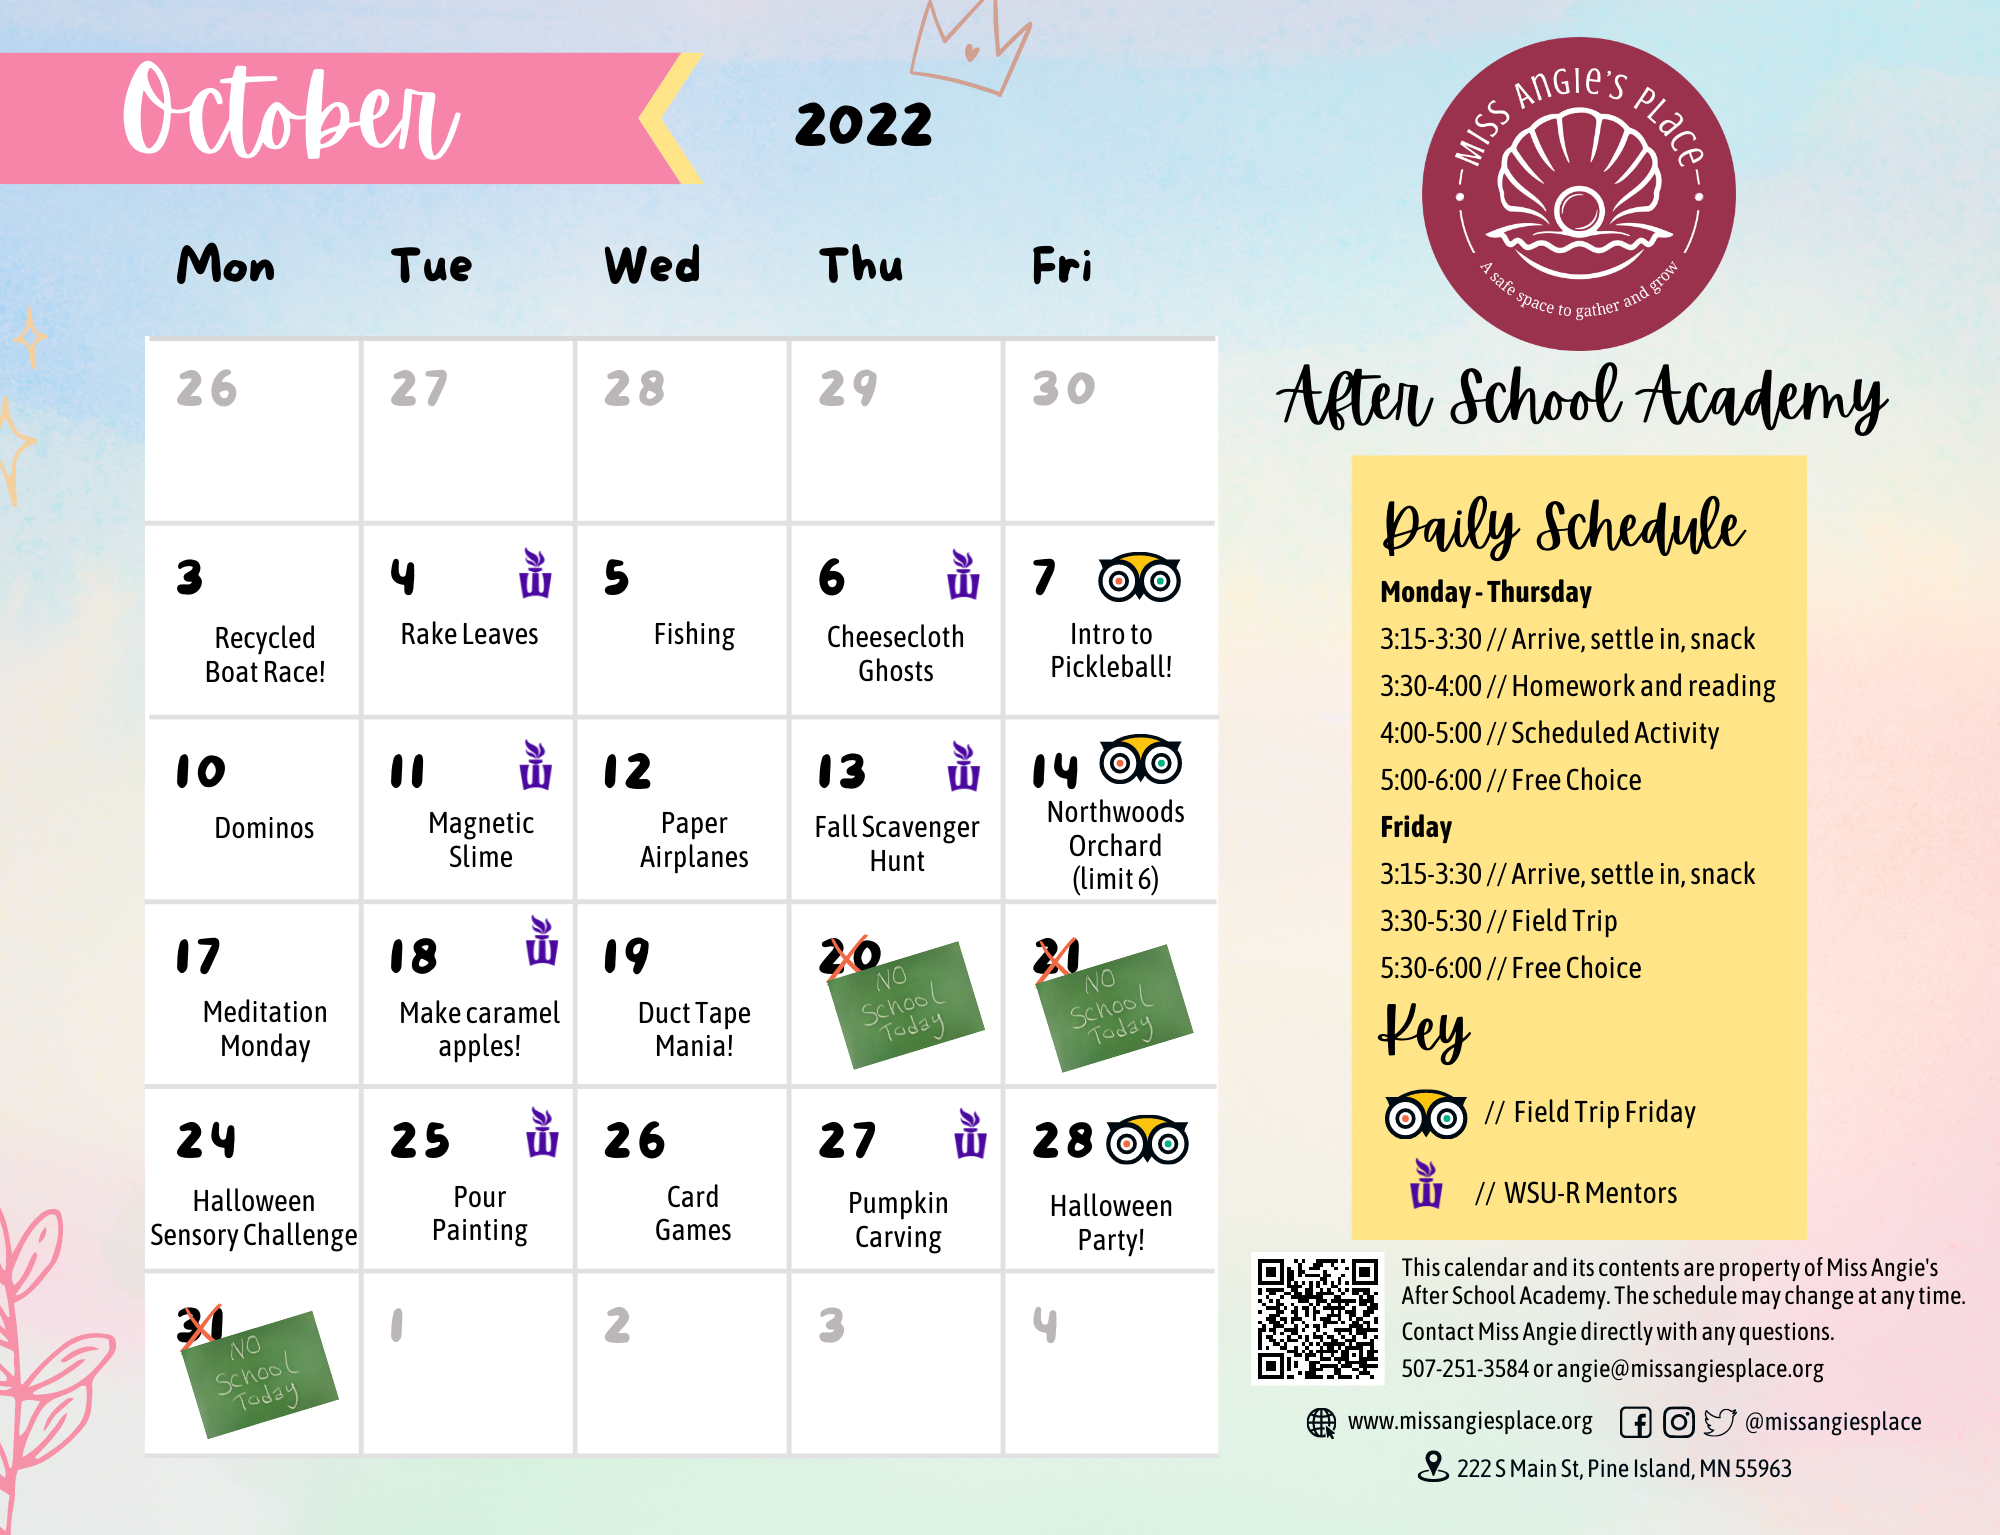 After School Academy October Calendar! Miss Angie's Place